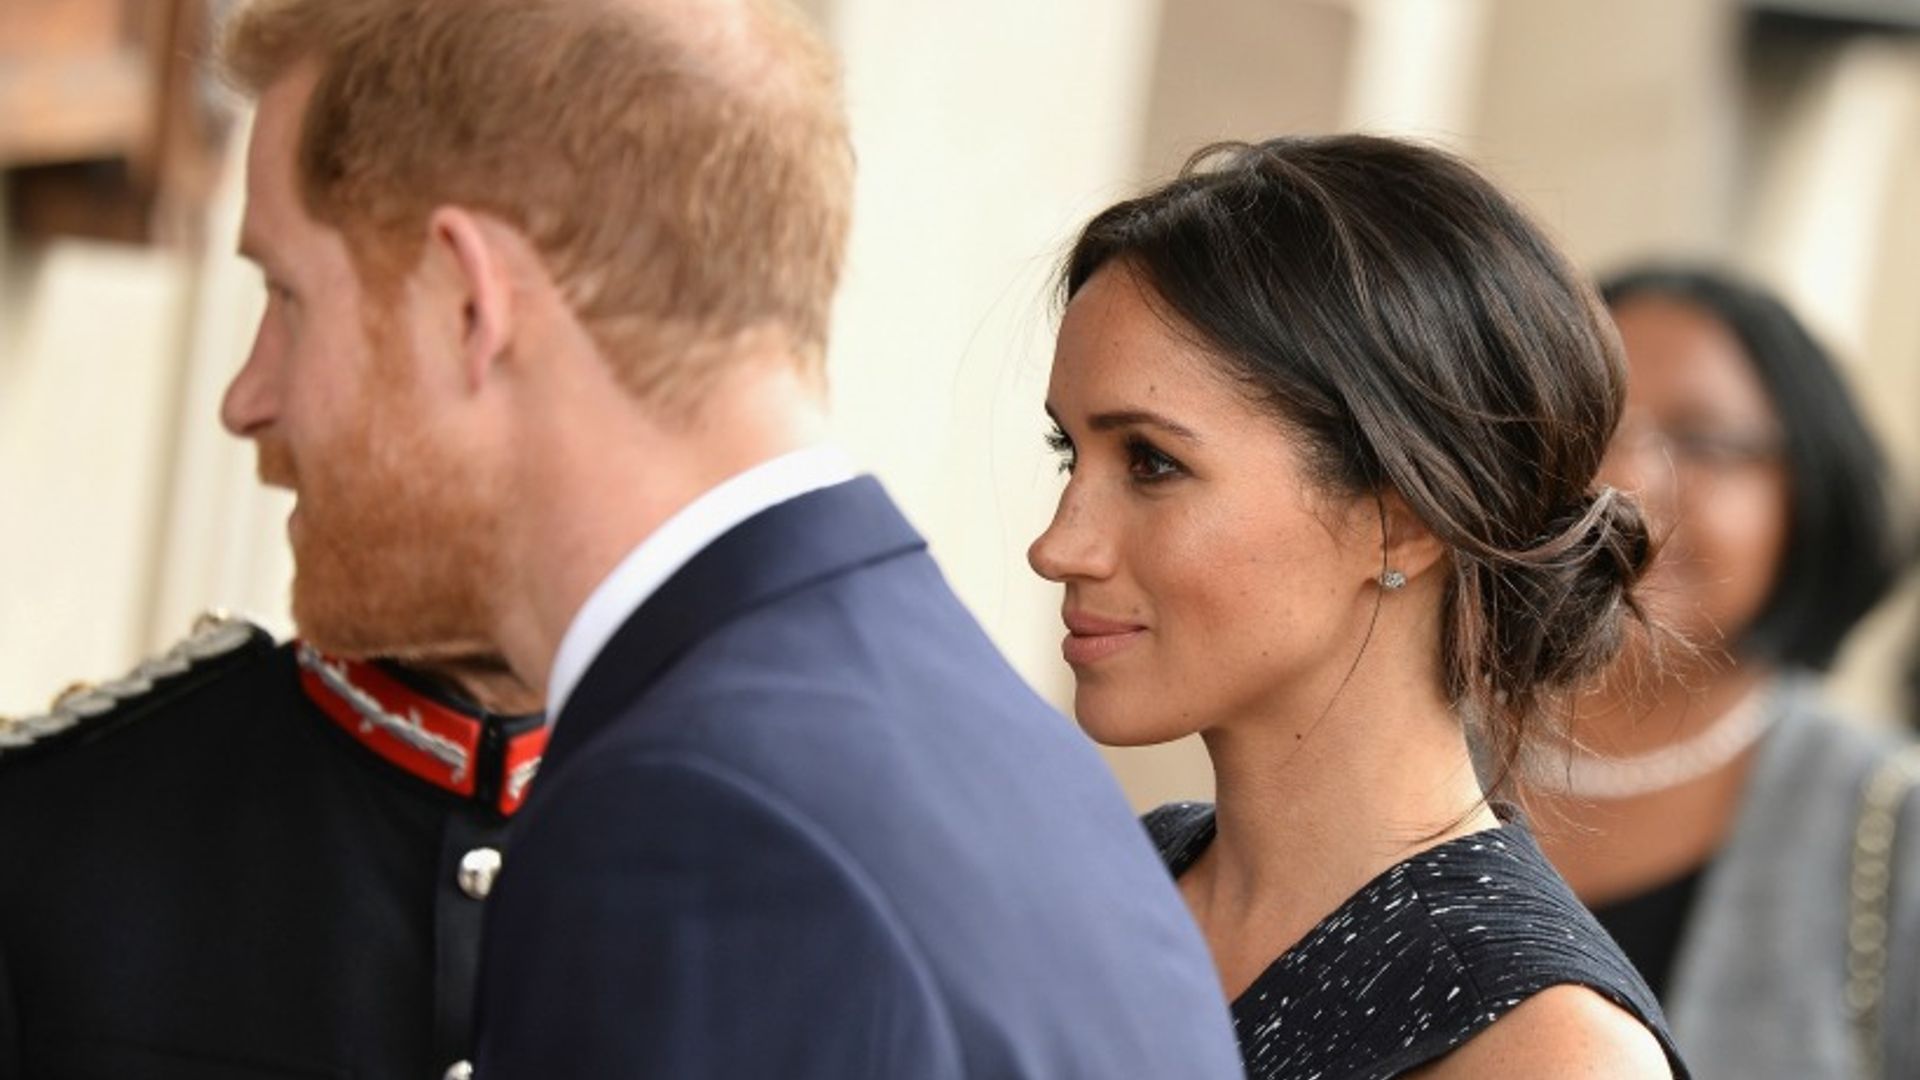 Meghan Markle recycles her casual bun hairstyle during appearance with Prince Harry